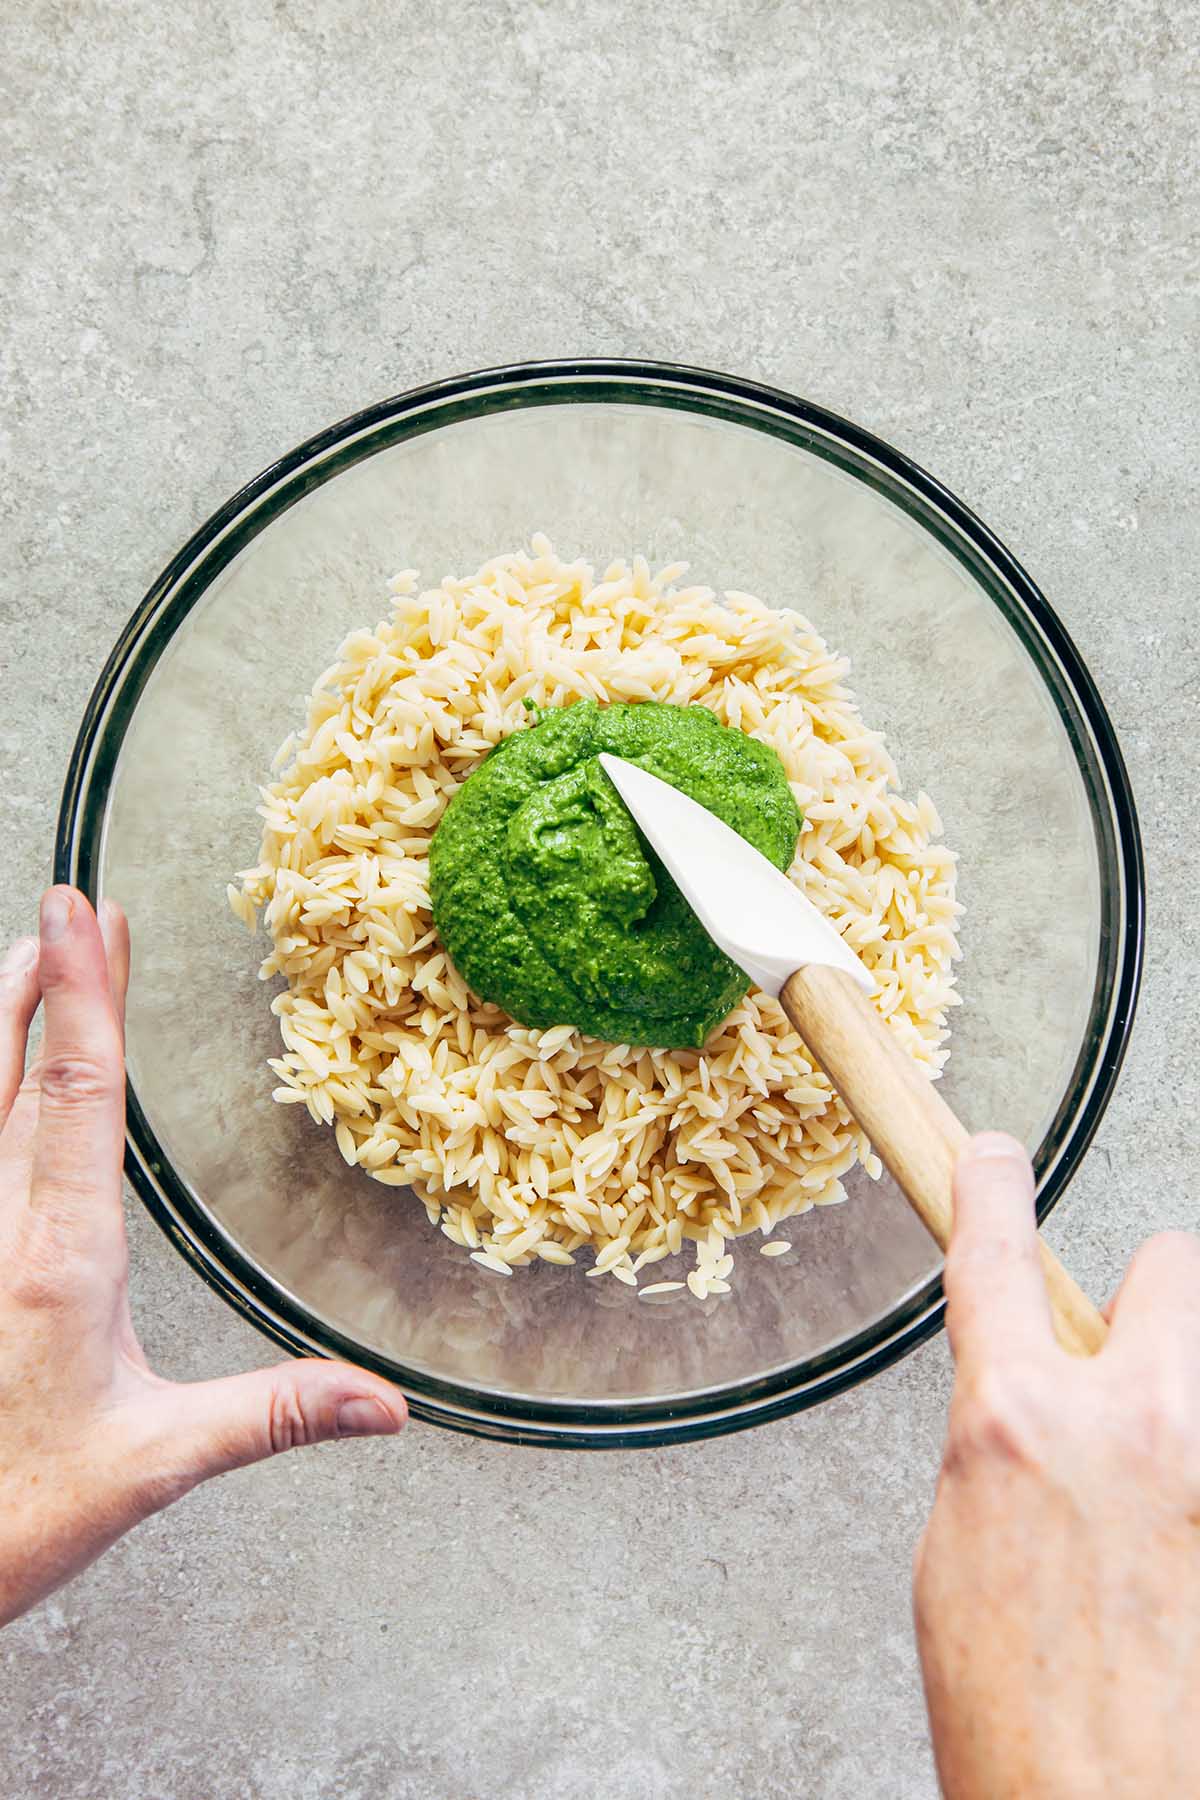 Hands stirring green pesto into a bowl of cooked orzo.